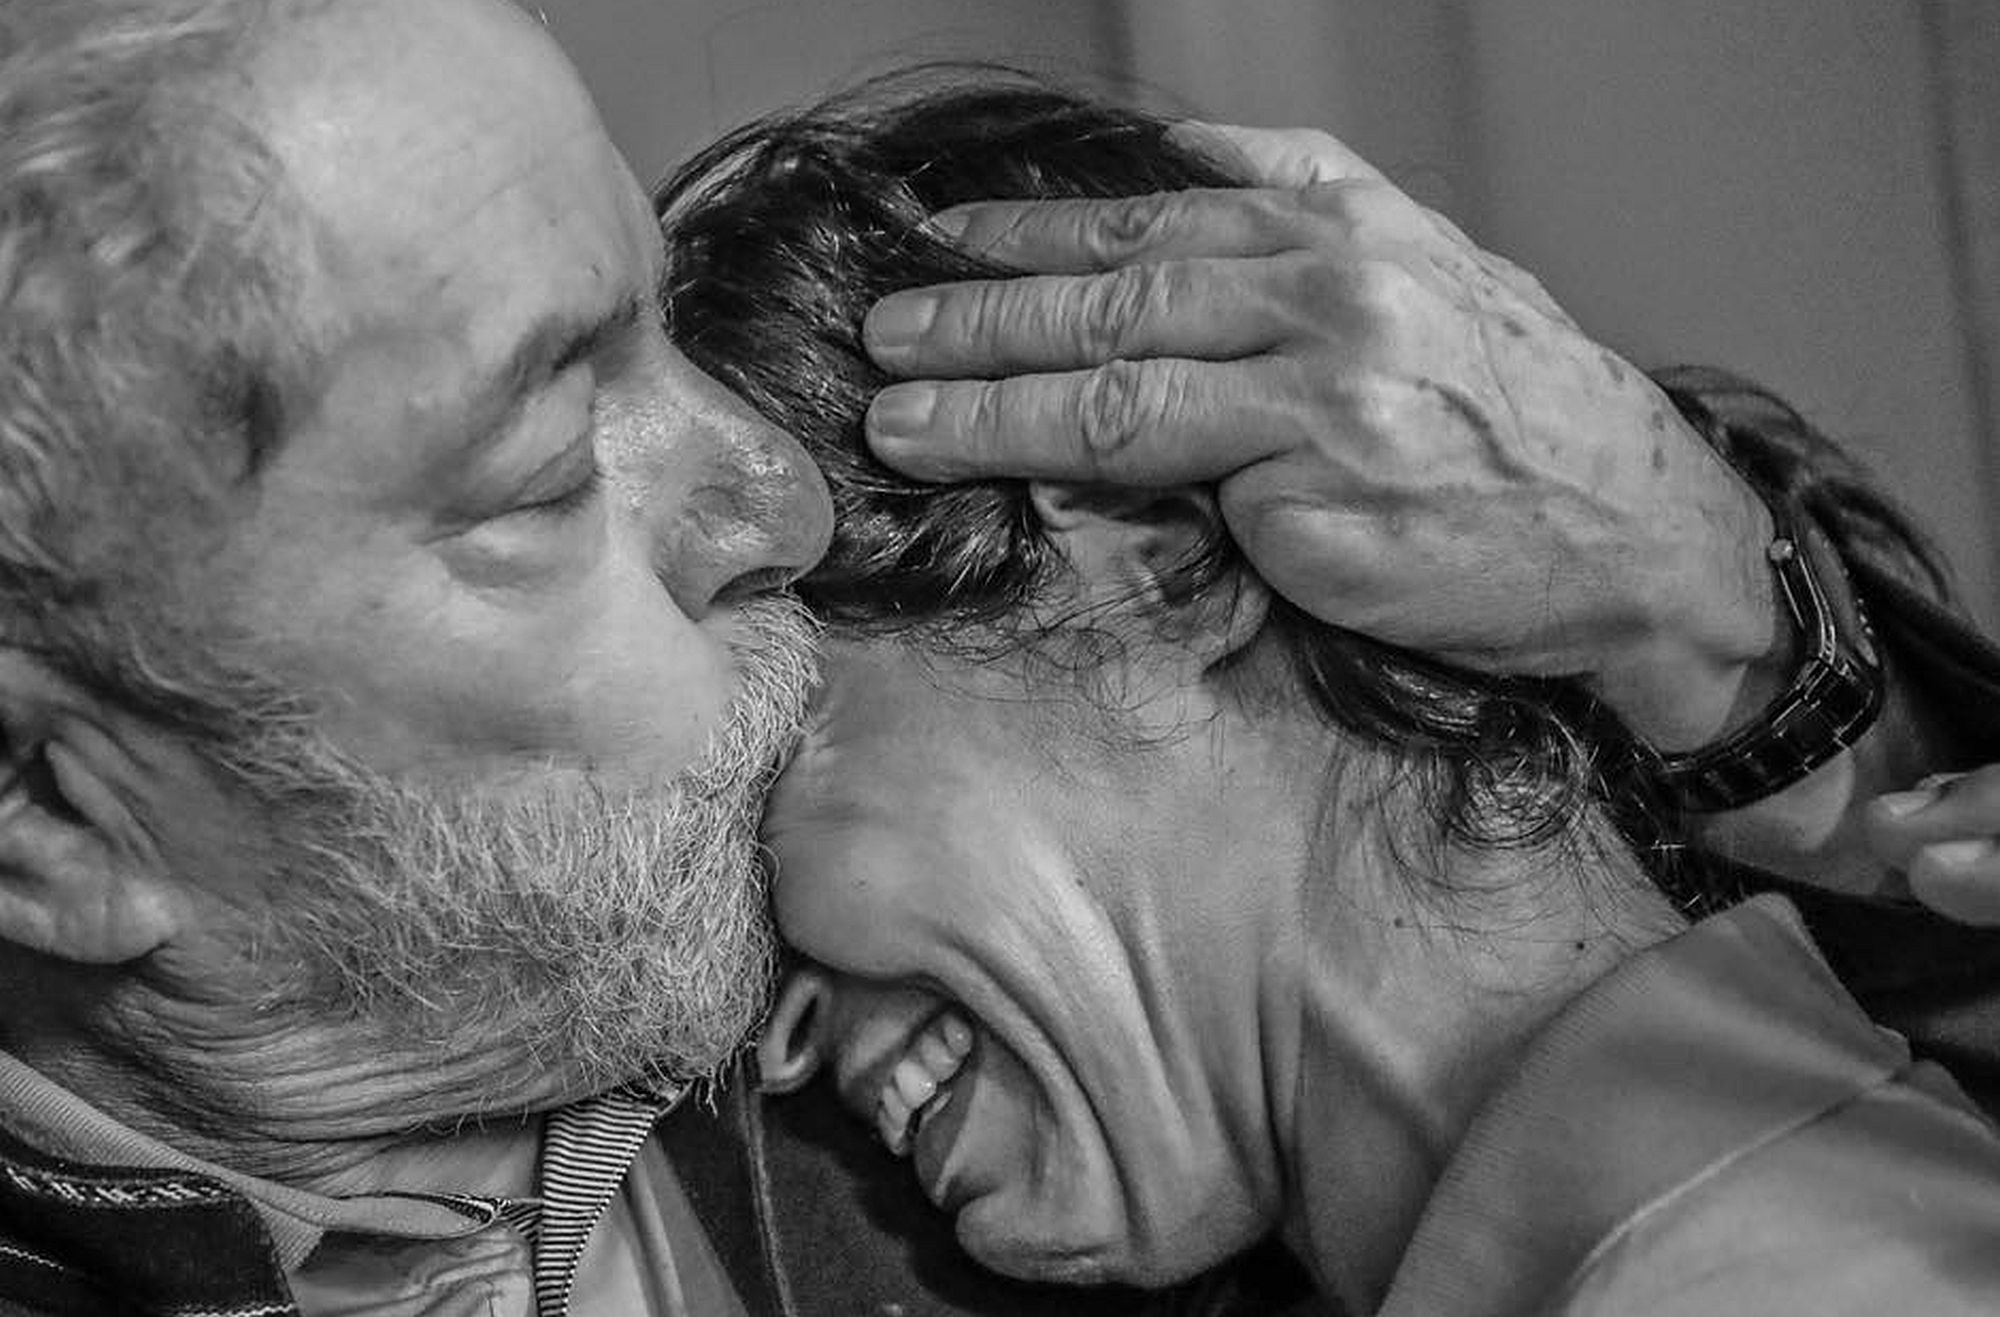 Lula being embraced just before going to jail - Photo: Ricardo Stuckert